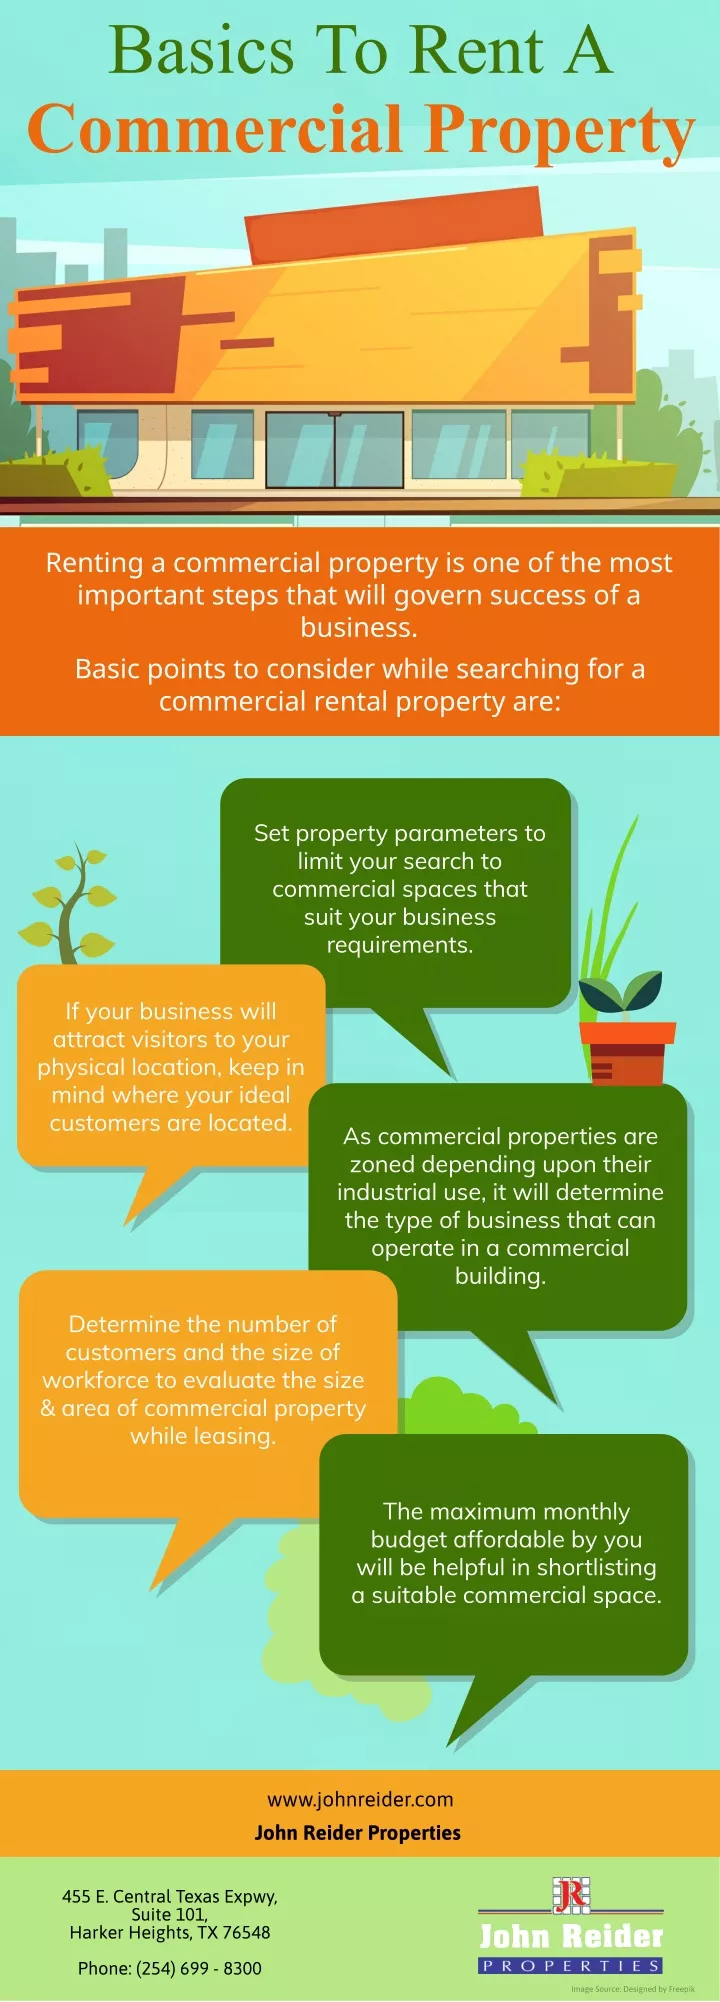 basics to rent a commercial property